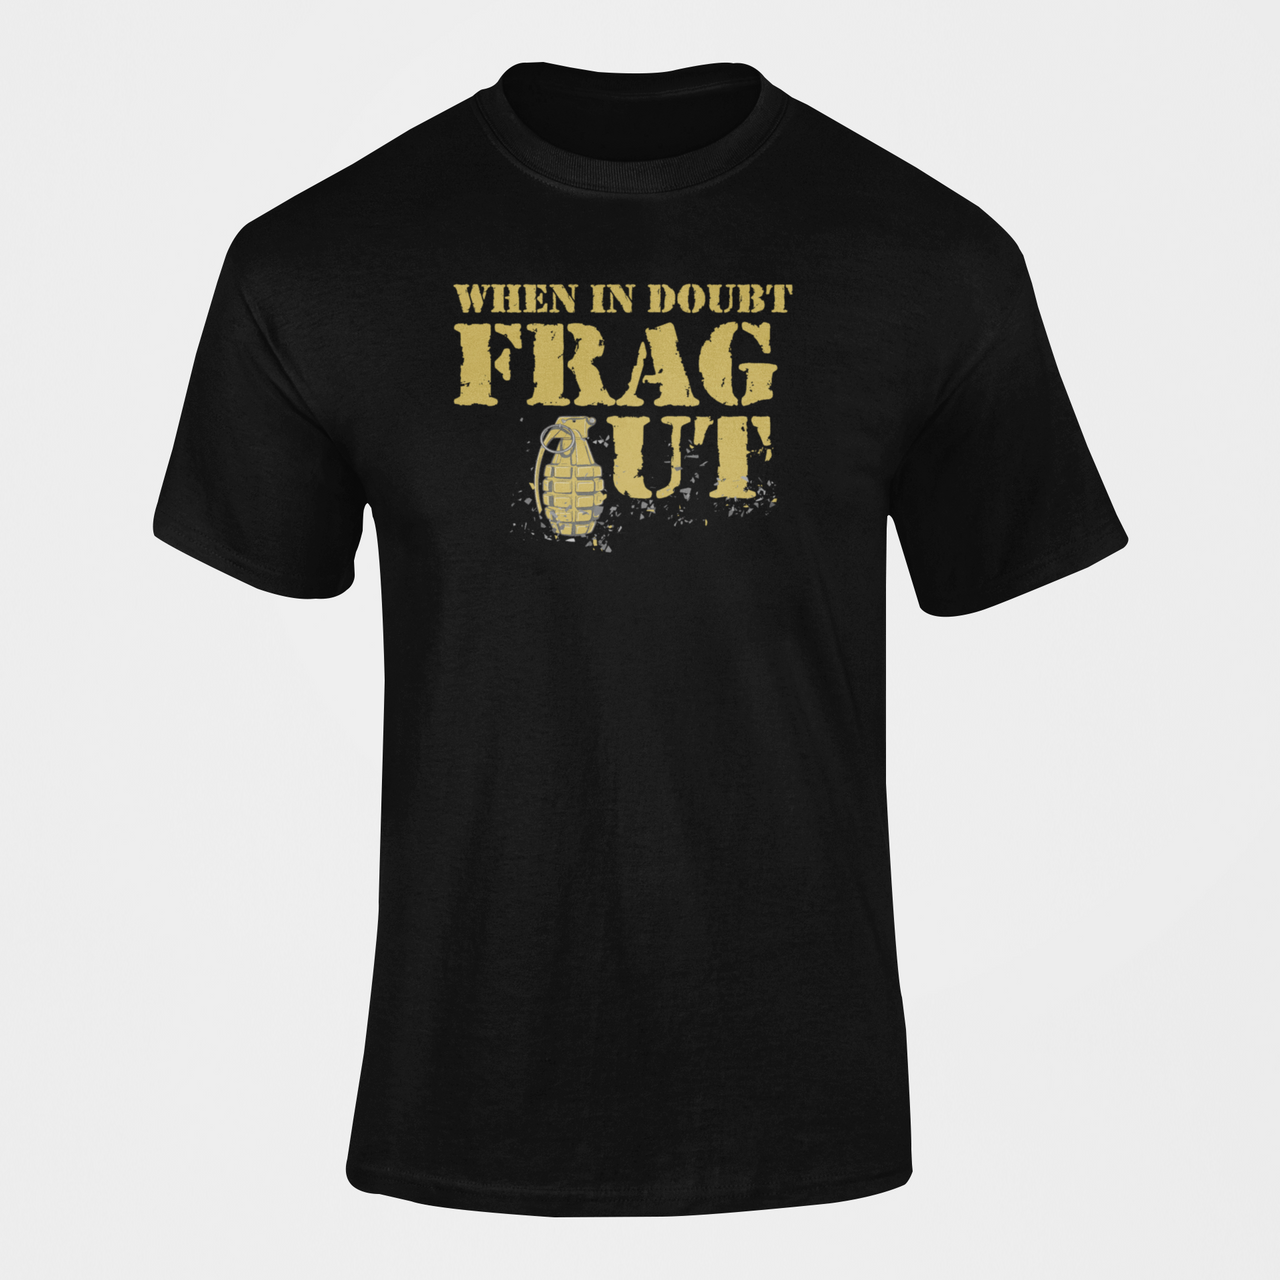 Army T-shirt - When in Doubt Frag Out (Men)